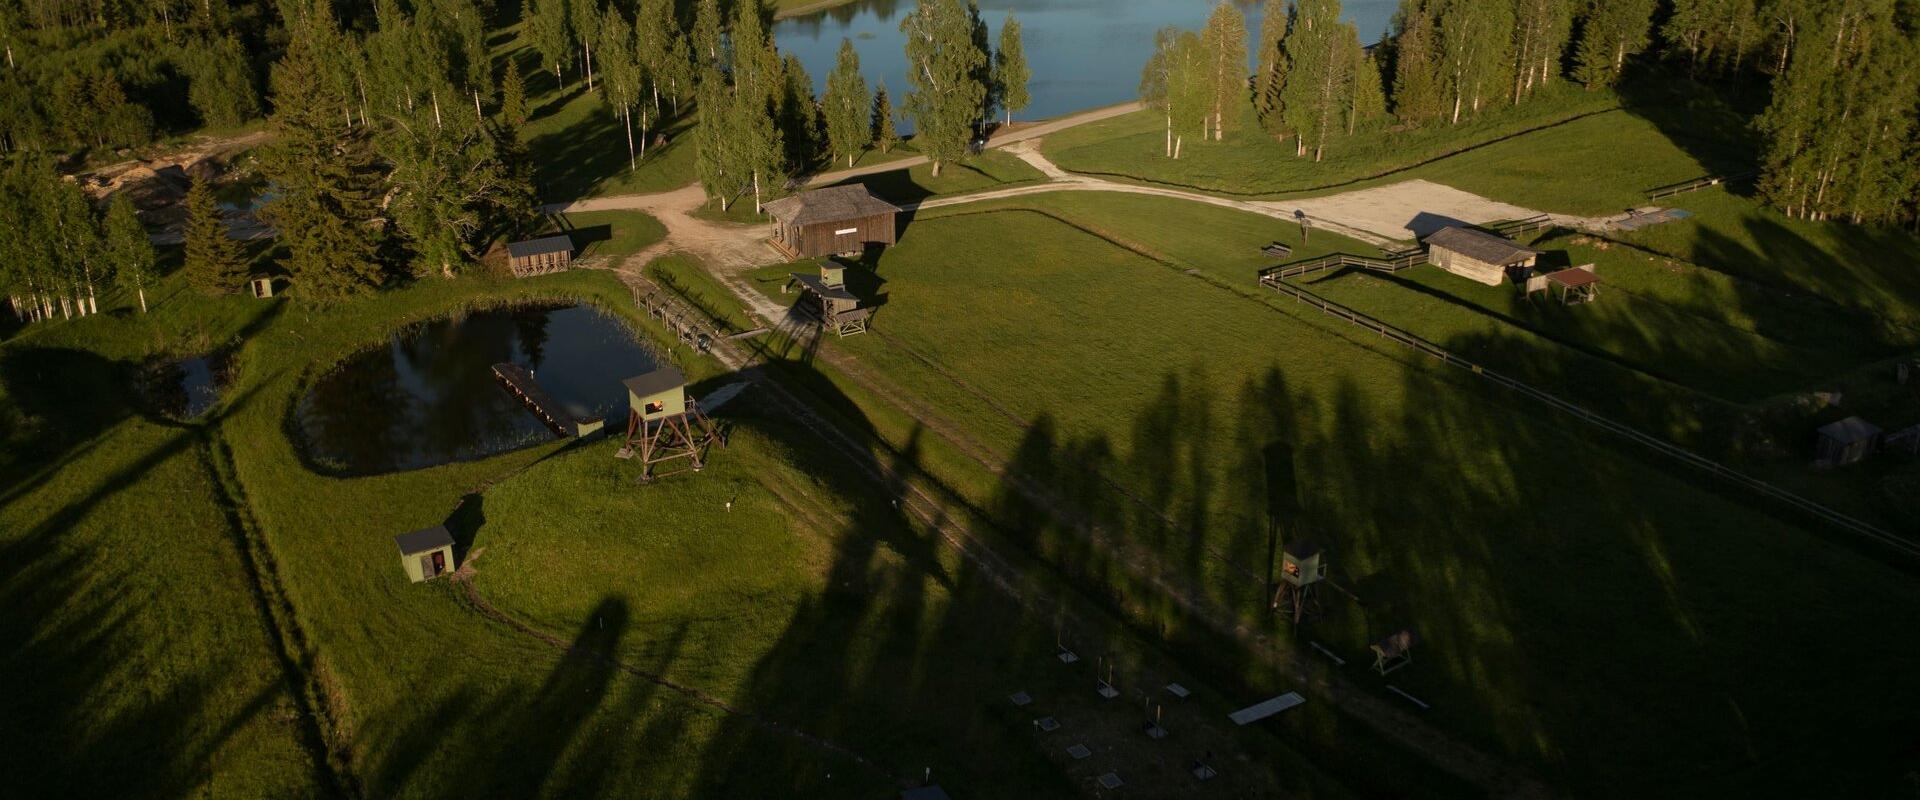 Hunting and Target Shooting Centre of the Toosikannu Holiday Centre